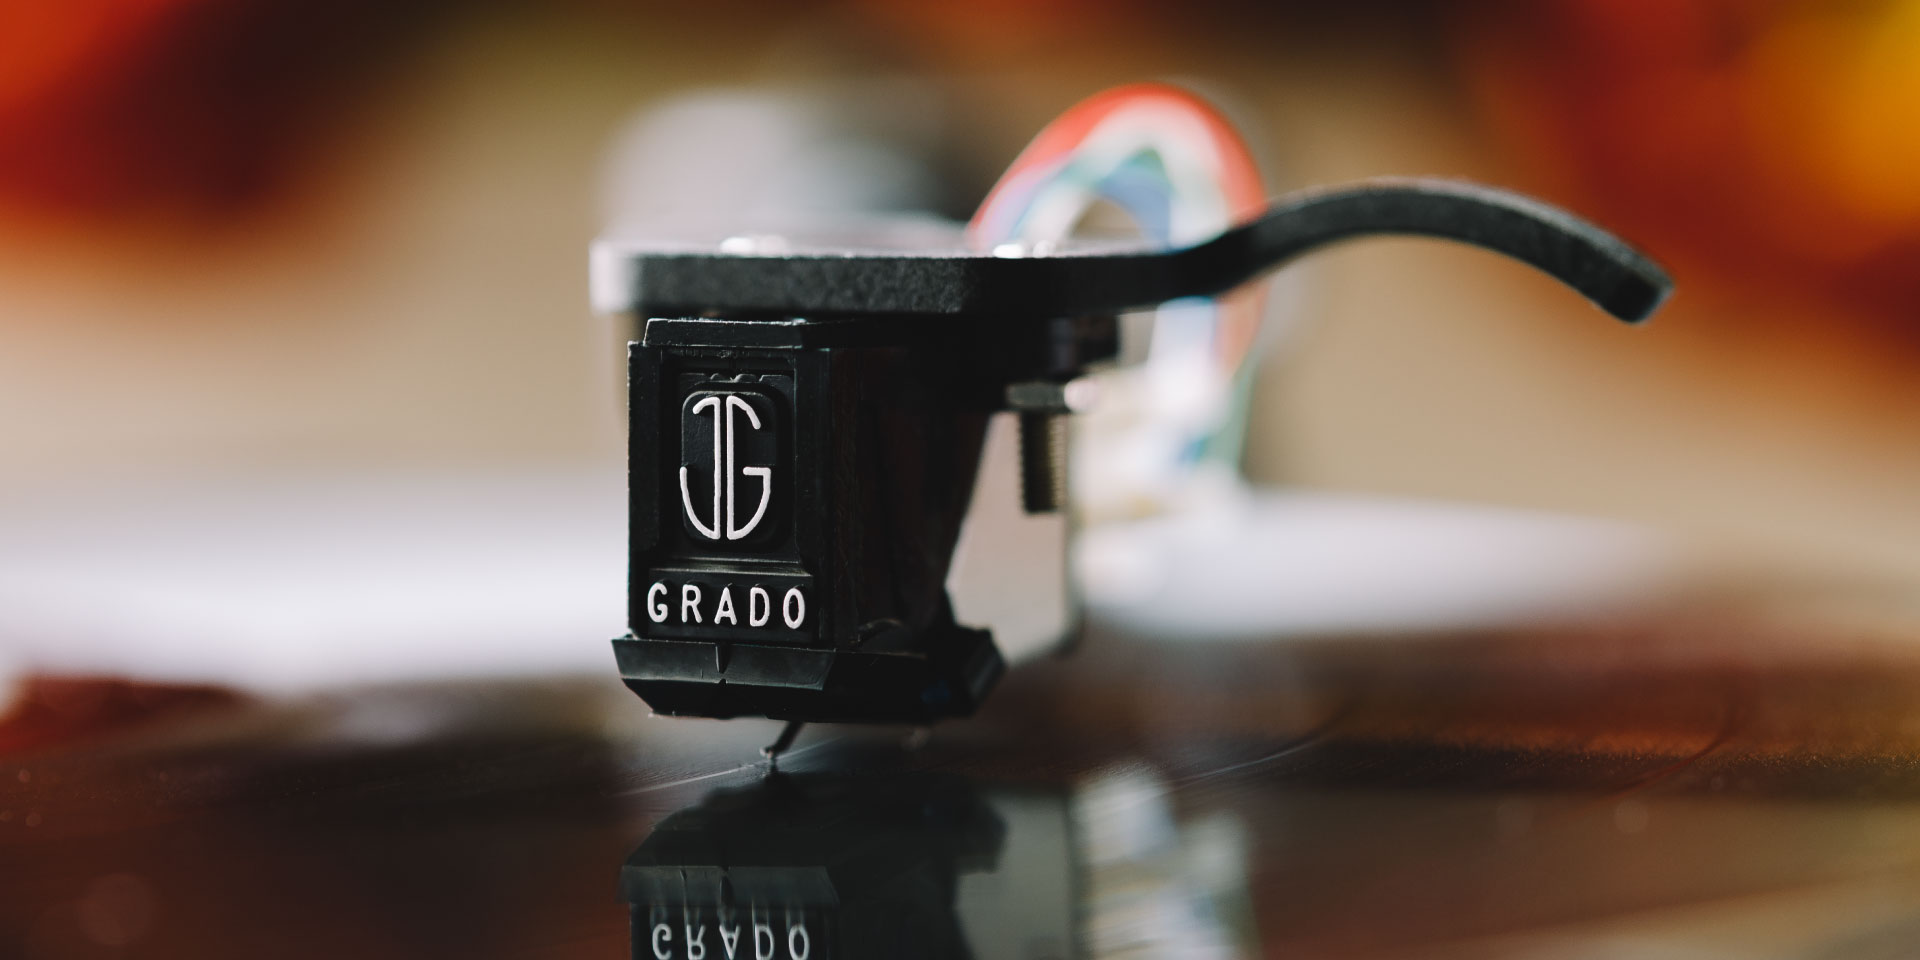 Photo of Grado phono cartridge playing a record with a blurred background